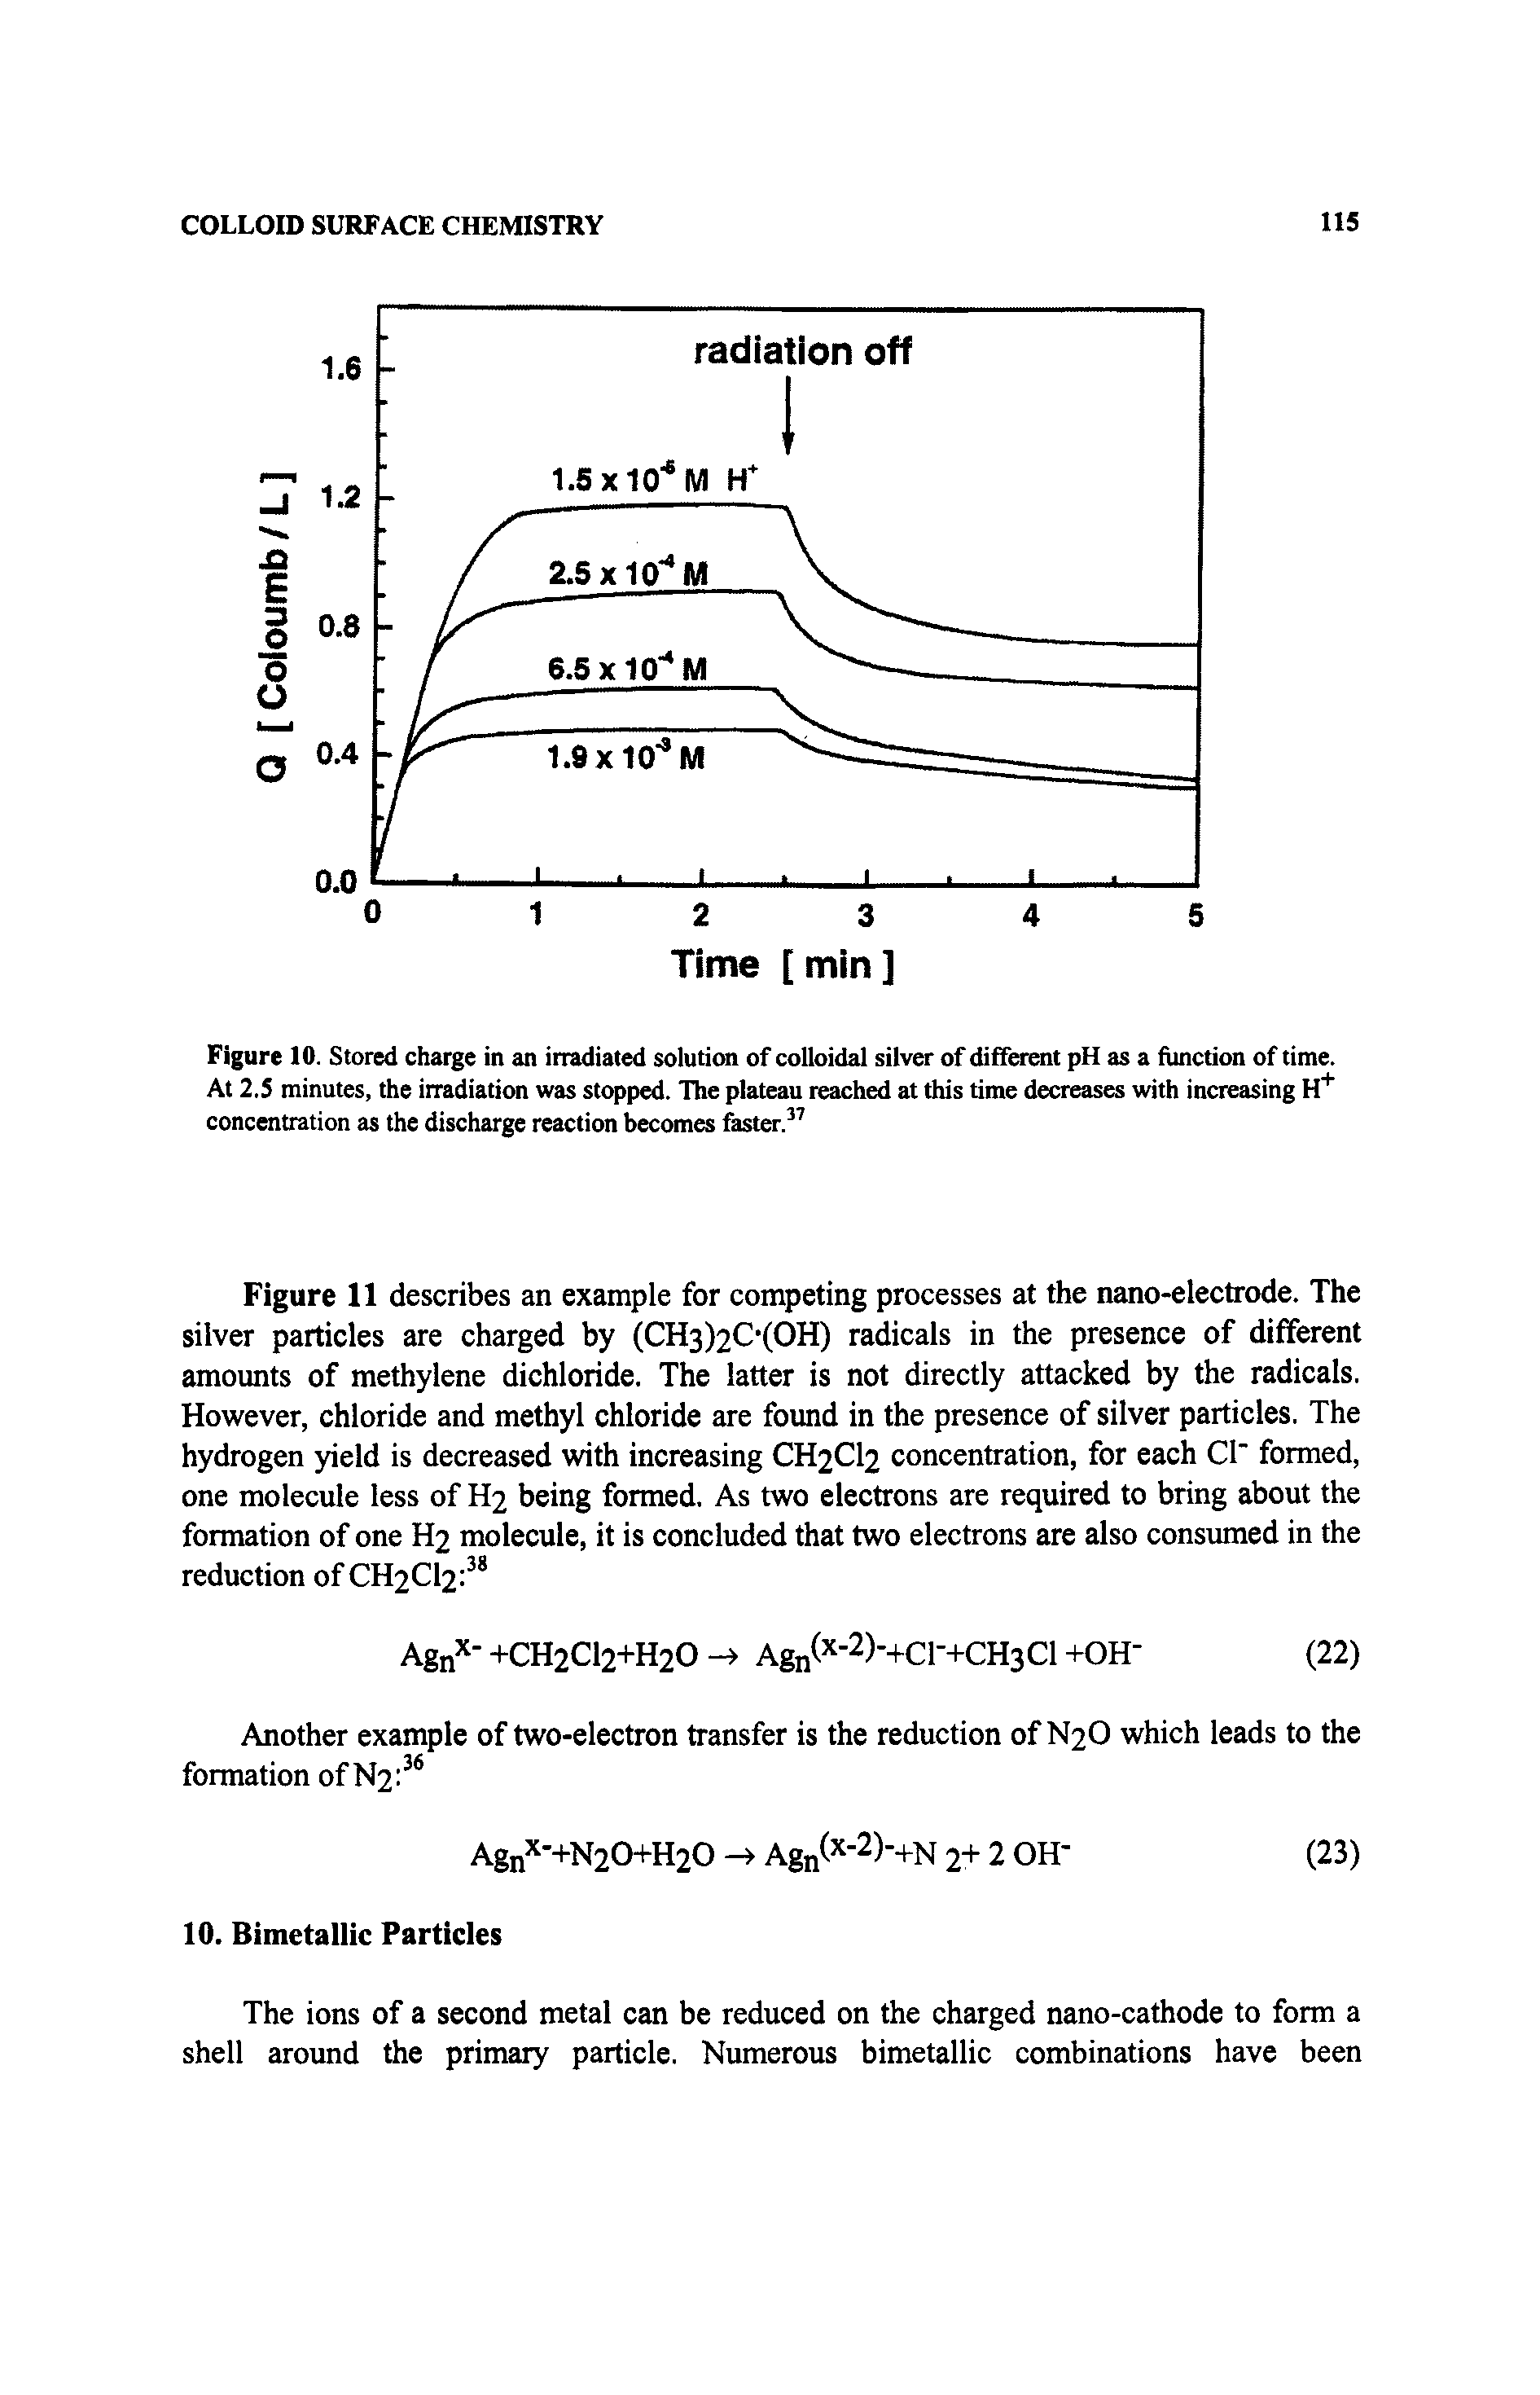 Figure 10. Stored charge in an irradiated solutioi of colloidal silver of different pH as a function of time. At 2.S minutes, the irradiation was stopped. The plateau reached at this time decreases with increasing If concentration as the discharge reaction becomes ster. ...